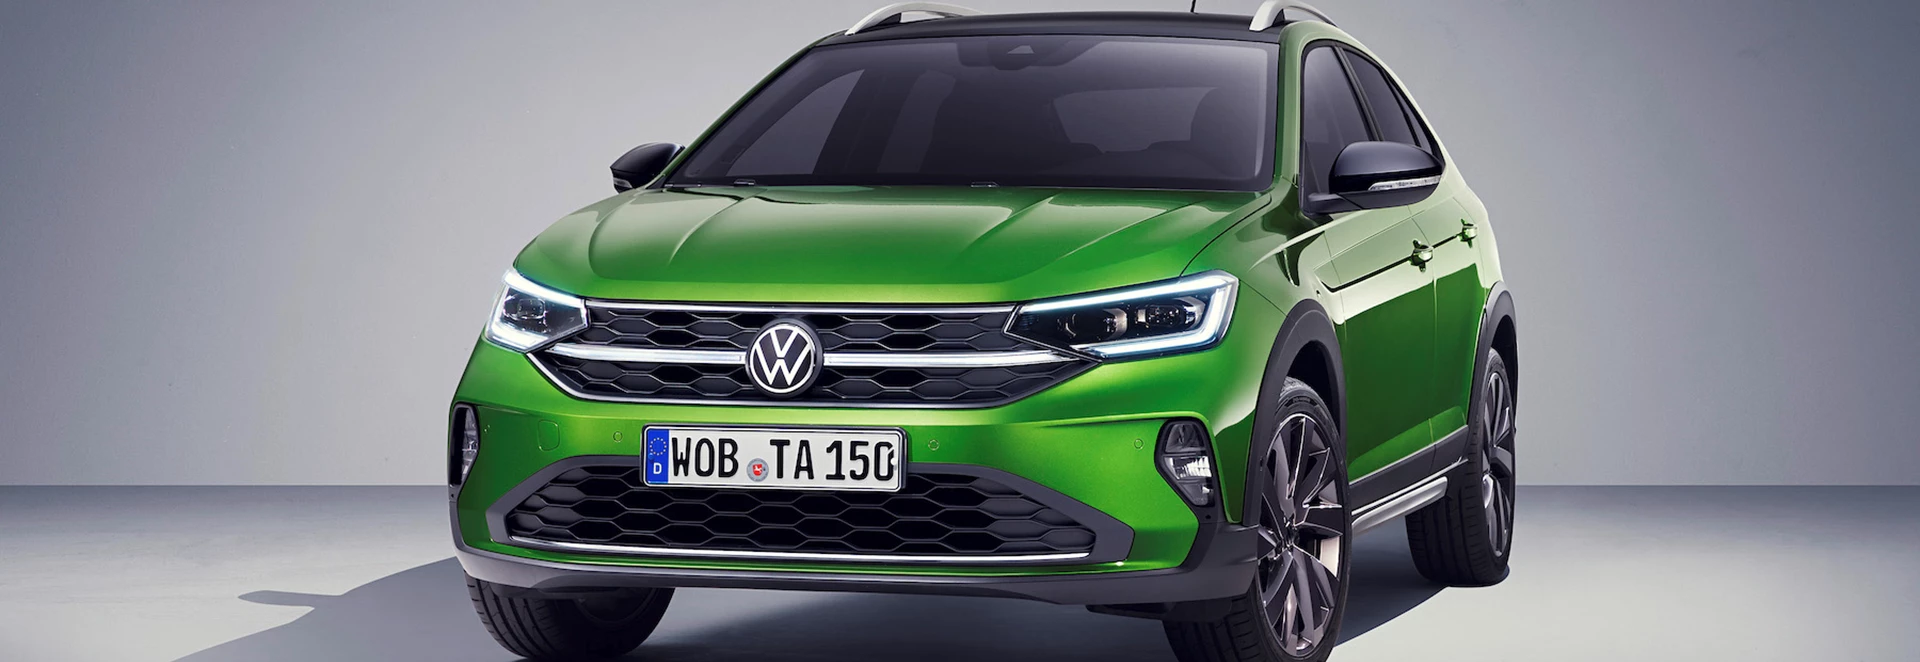 New 2022 Volkswagen Taigo brings coupe styling to brand’s SUV range 